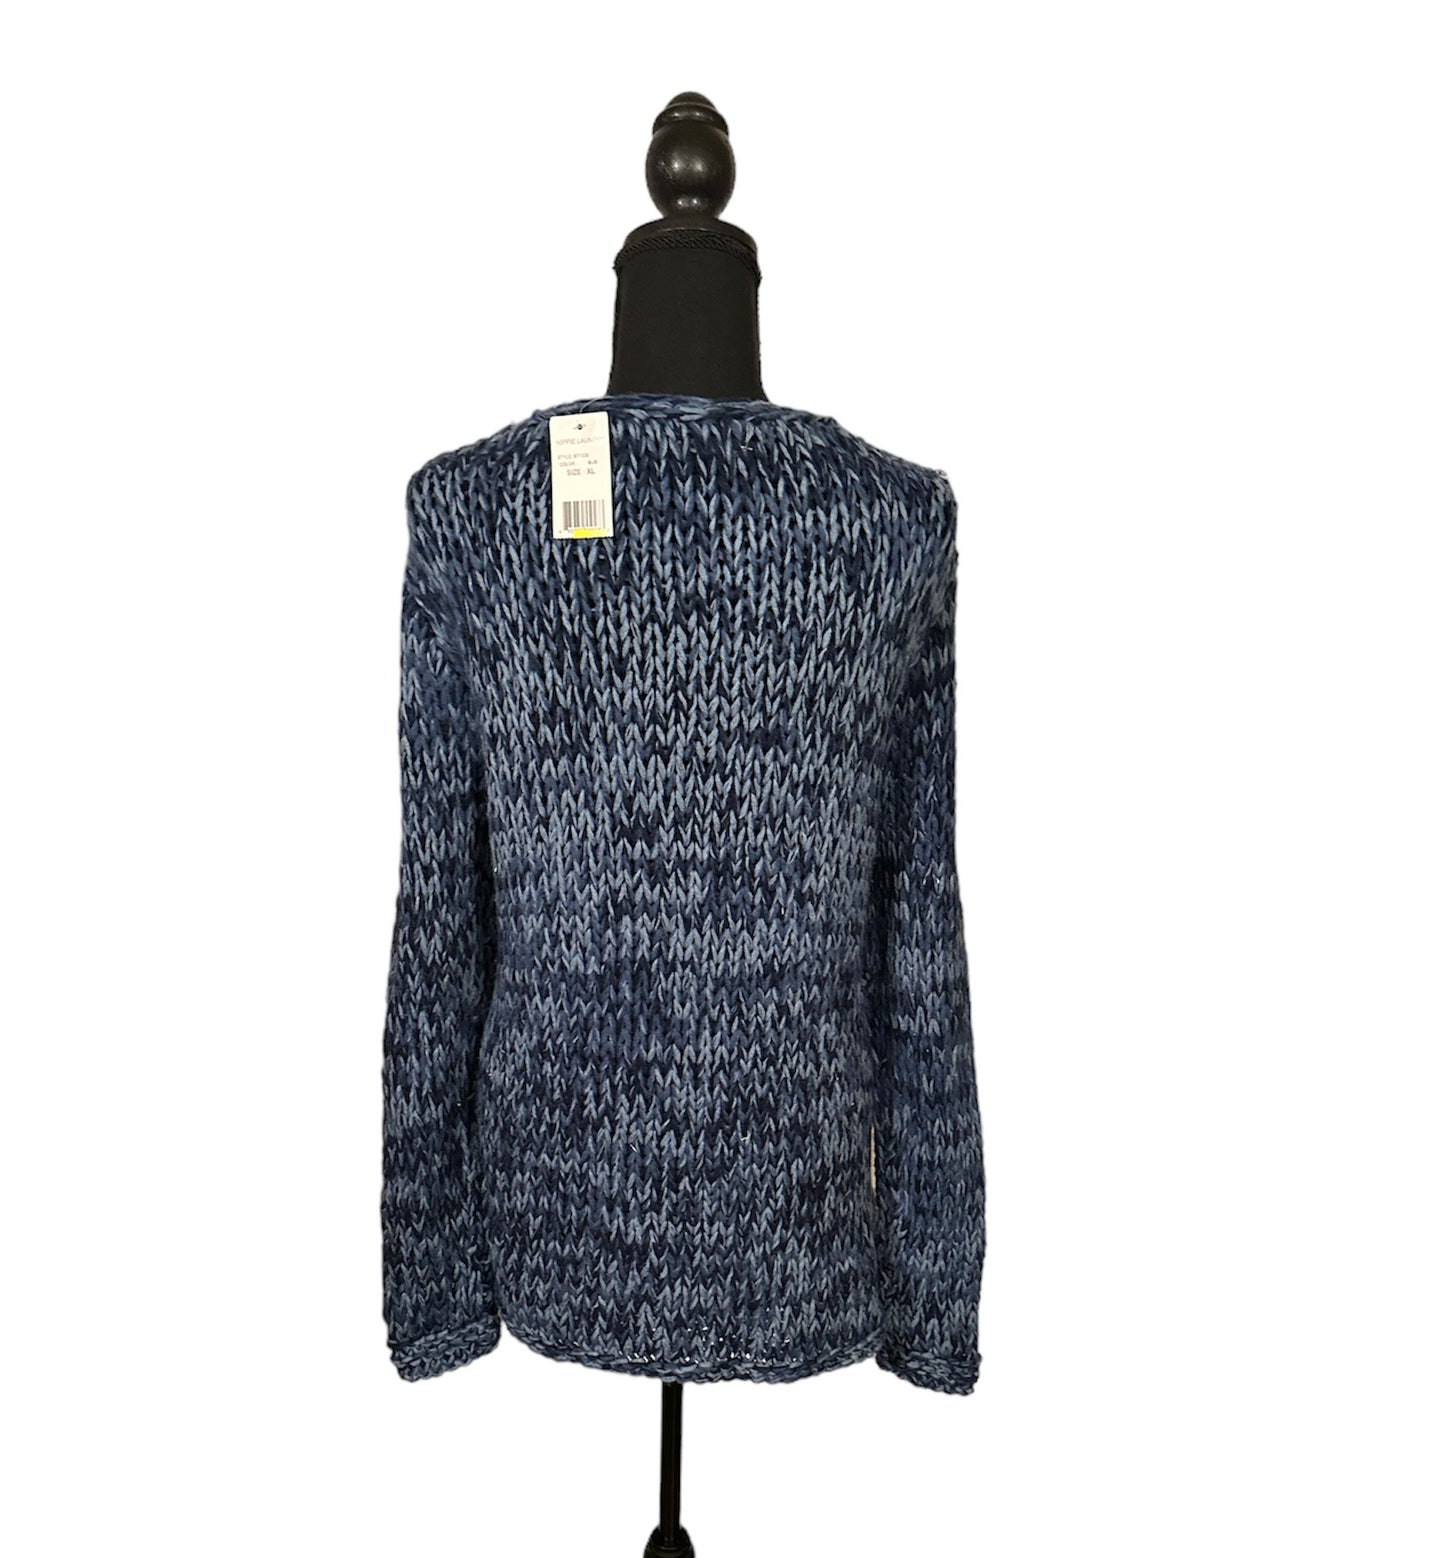 (NWT) Hippie Laundry - Blue Knitted Sweater Cardigan